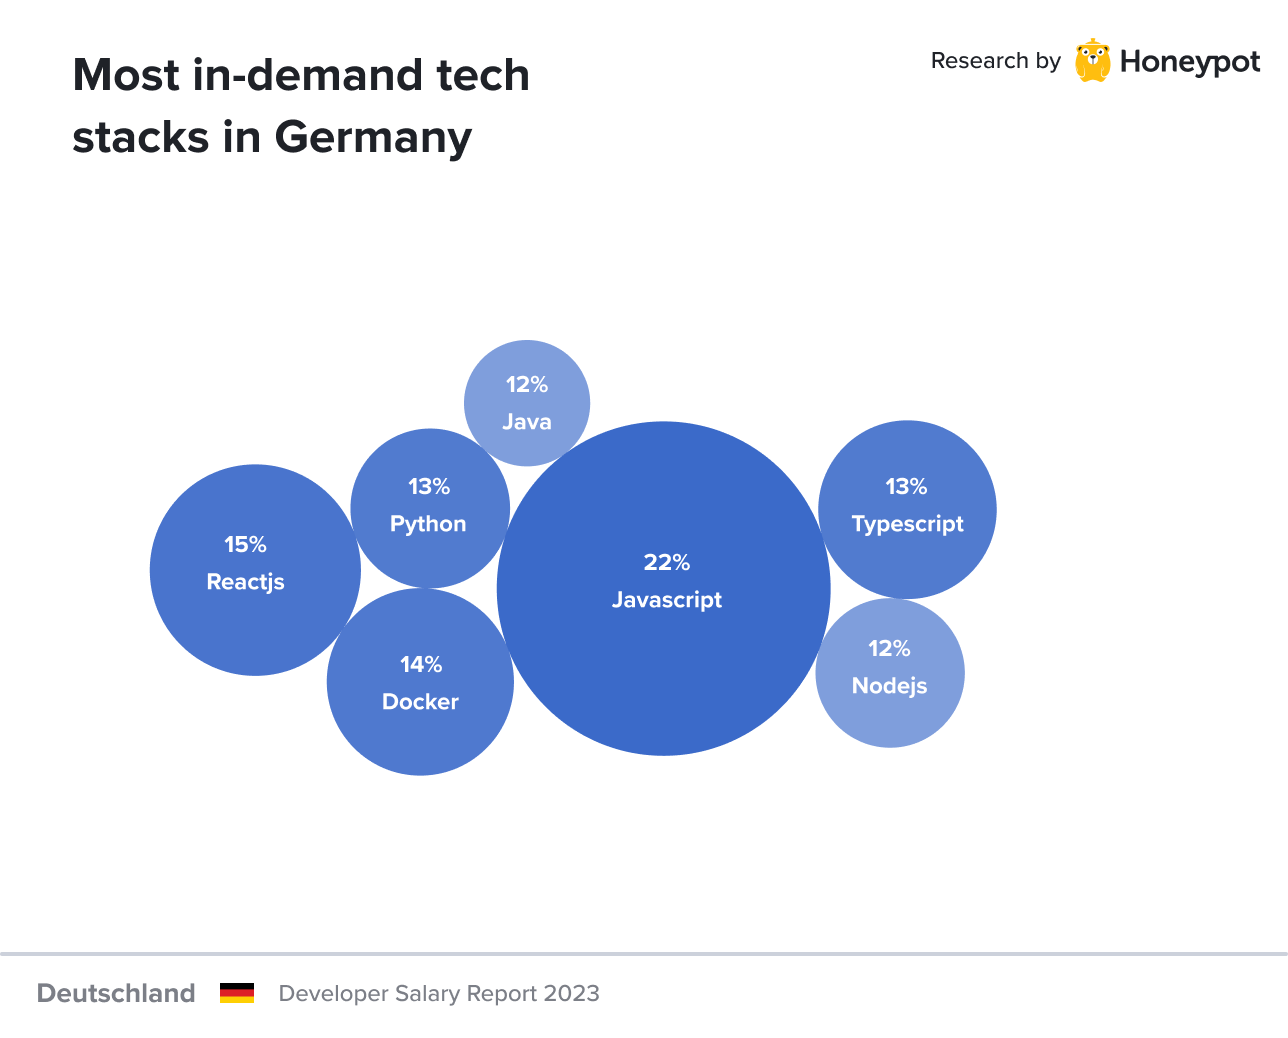 Germany – Most in-demand tech stacks